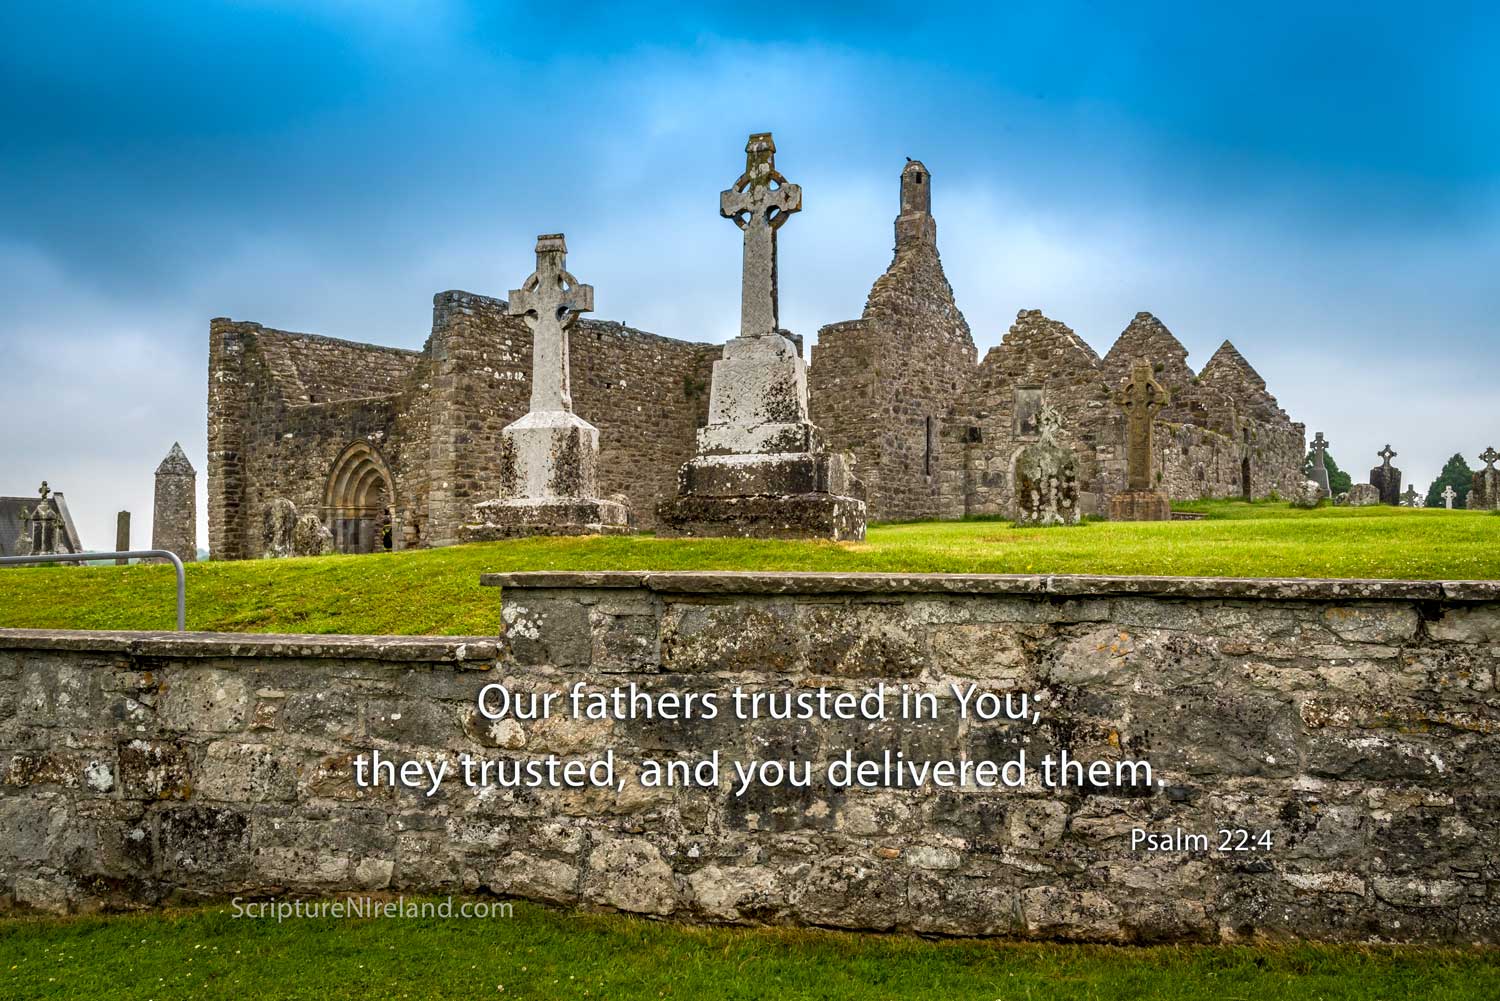 Ruin of Clonmacnoise Monastery, founded in 544AD by St Ciaran